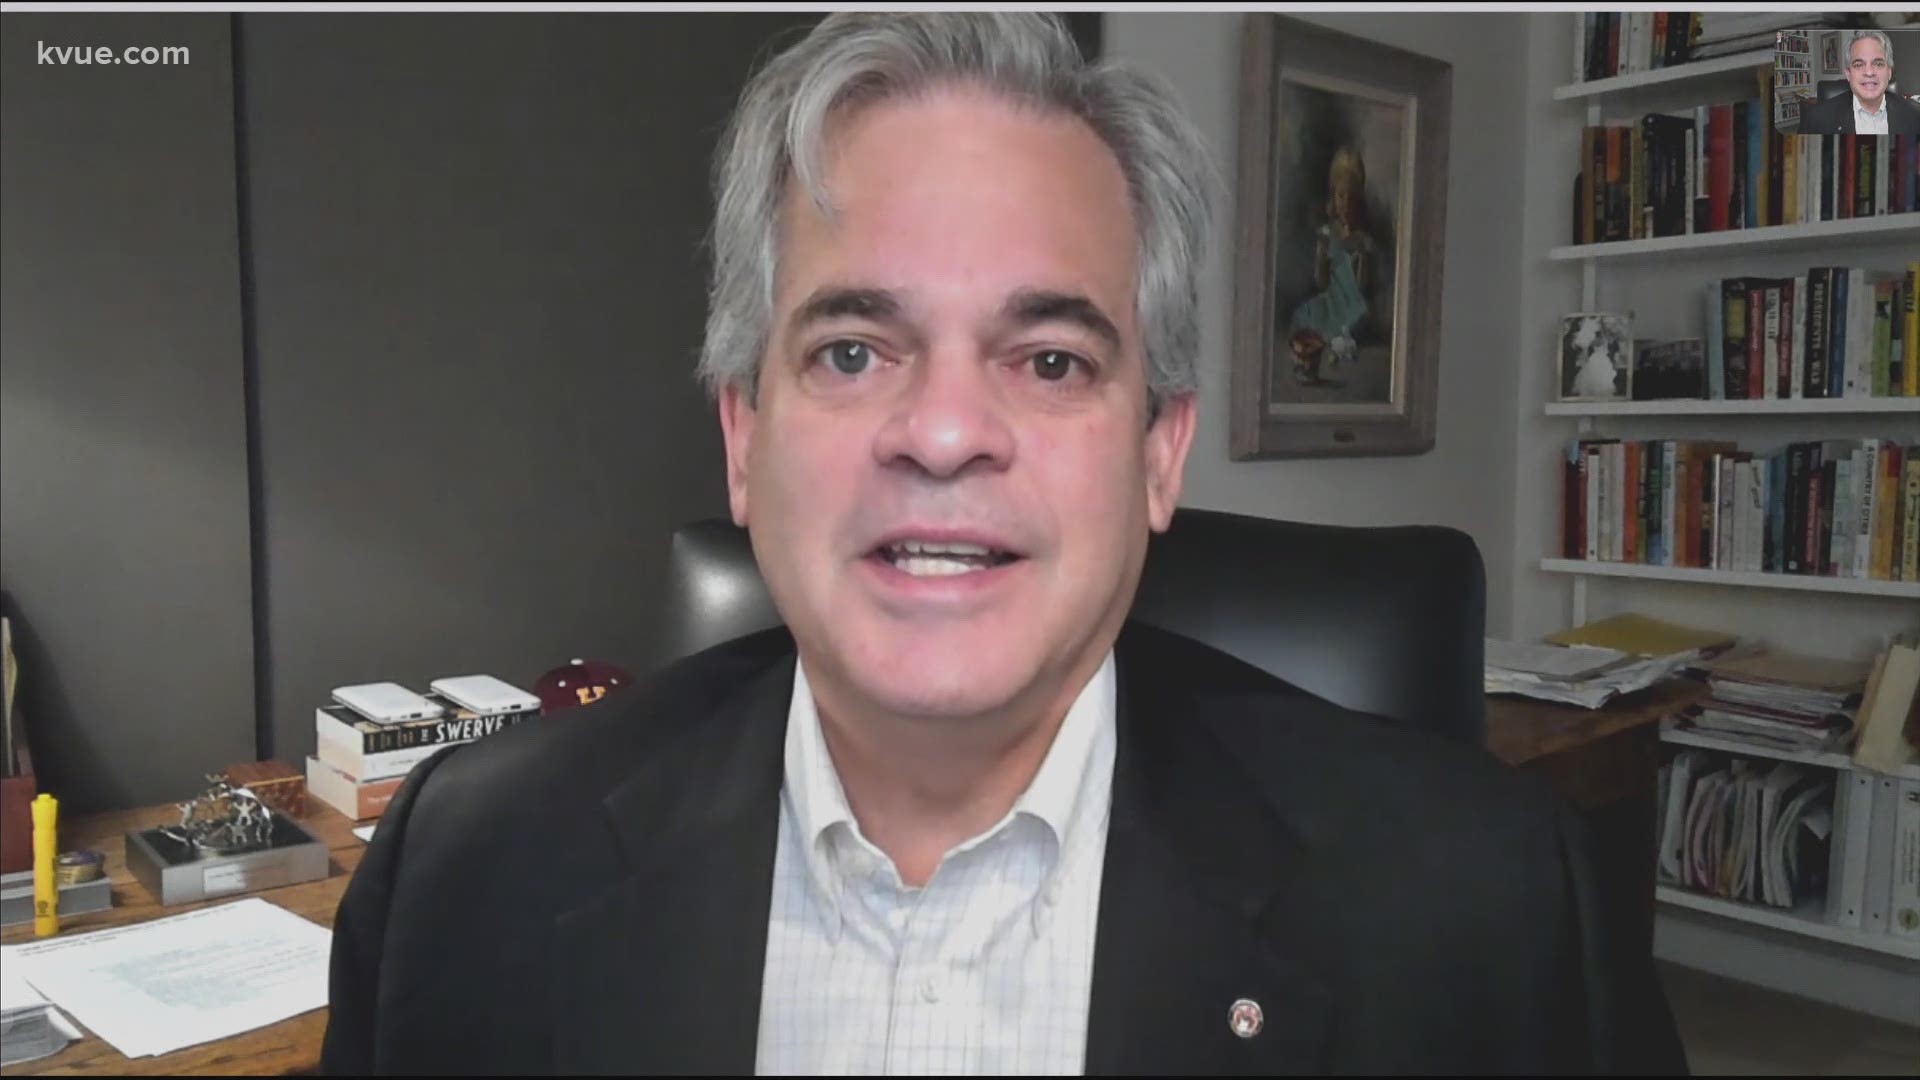 Mayor Adler talked about Gov. Abbott’s pledge against defunding police and COVID-19.